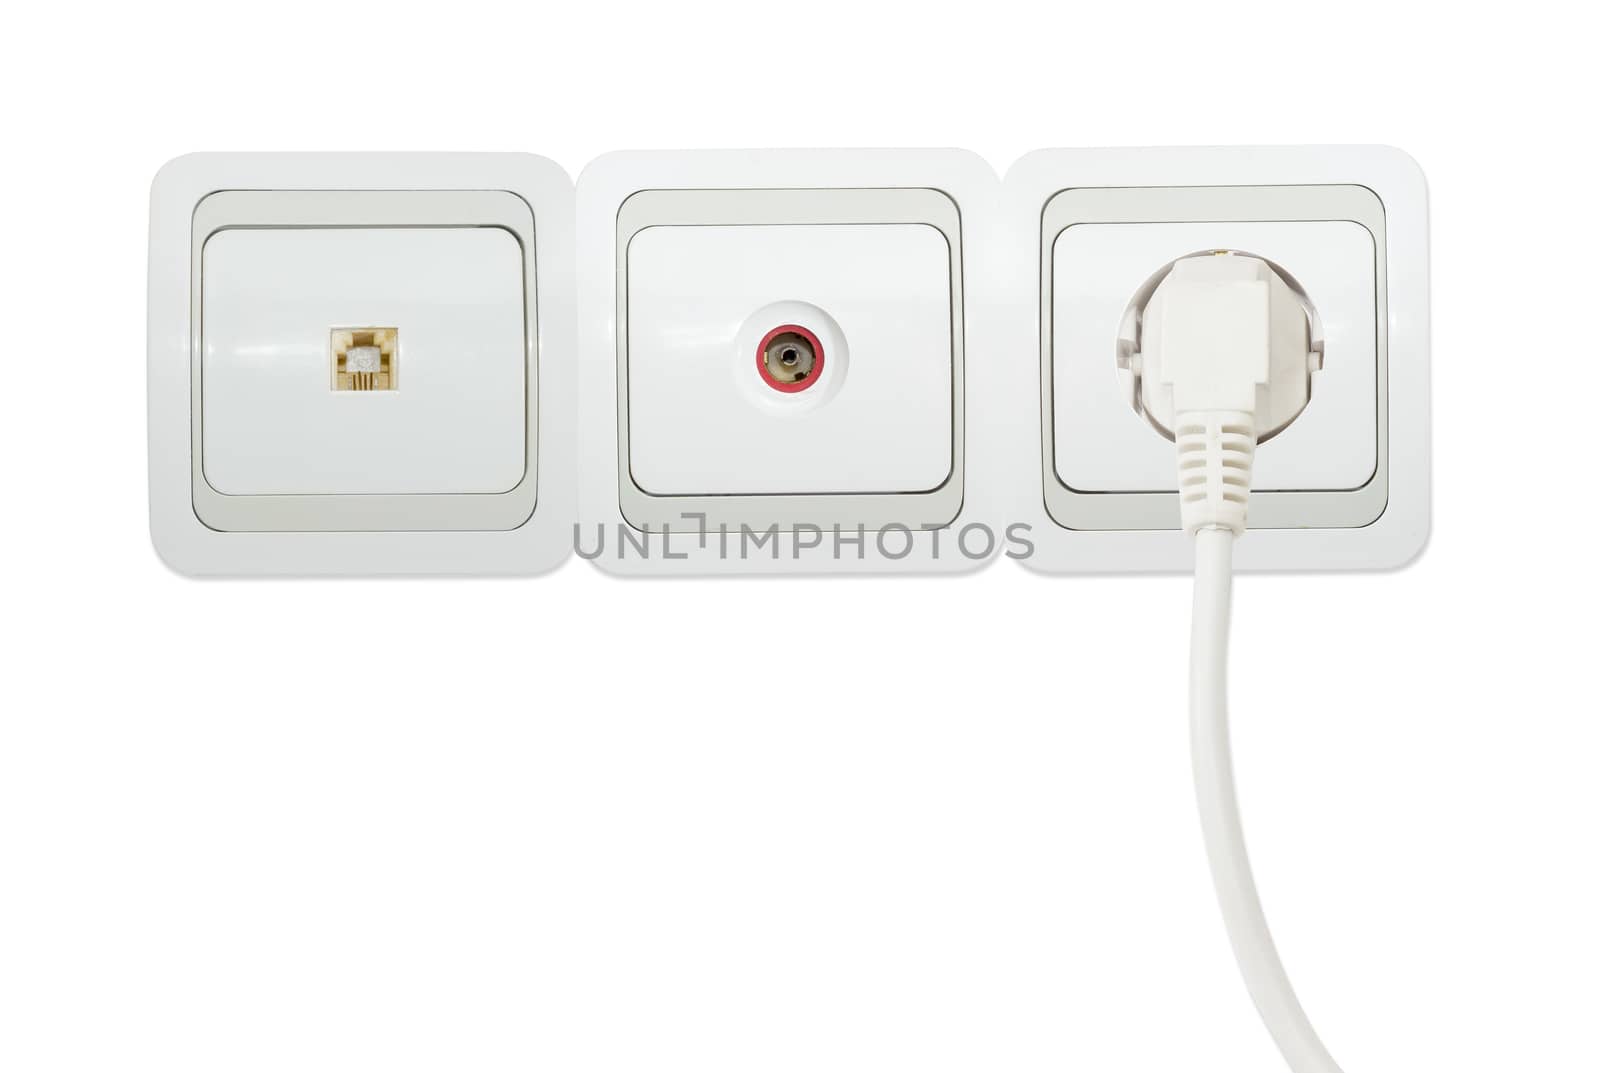 Block of three various white and gray domestic wall sockets including power socket with the connected white power cable, telephone socket and TV aerial coaxial socket on a light background
